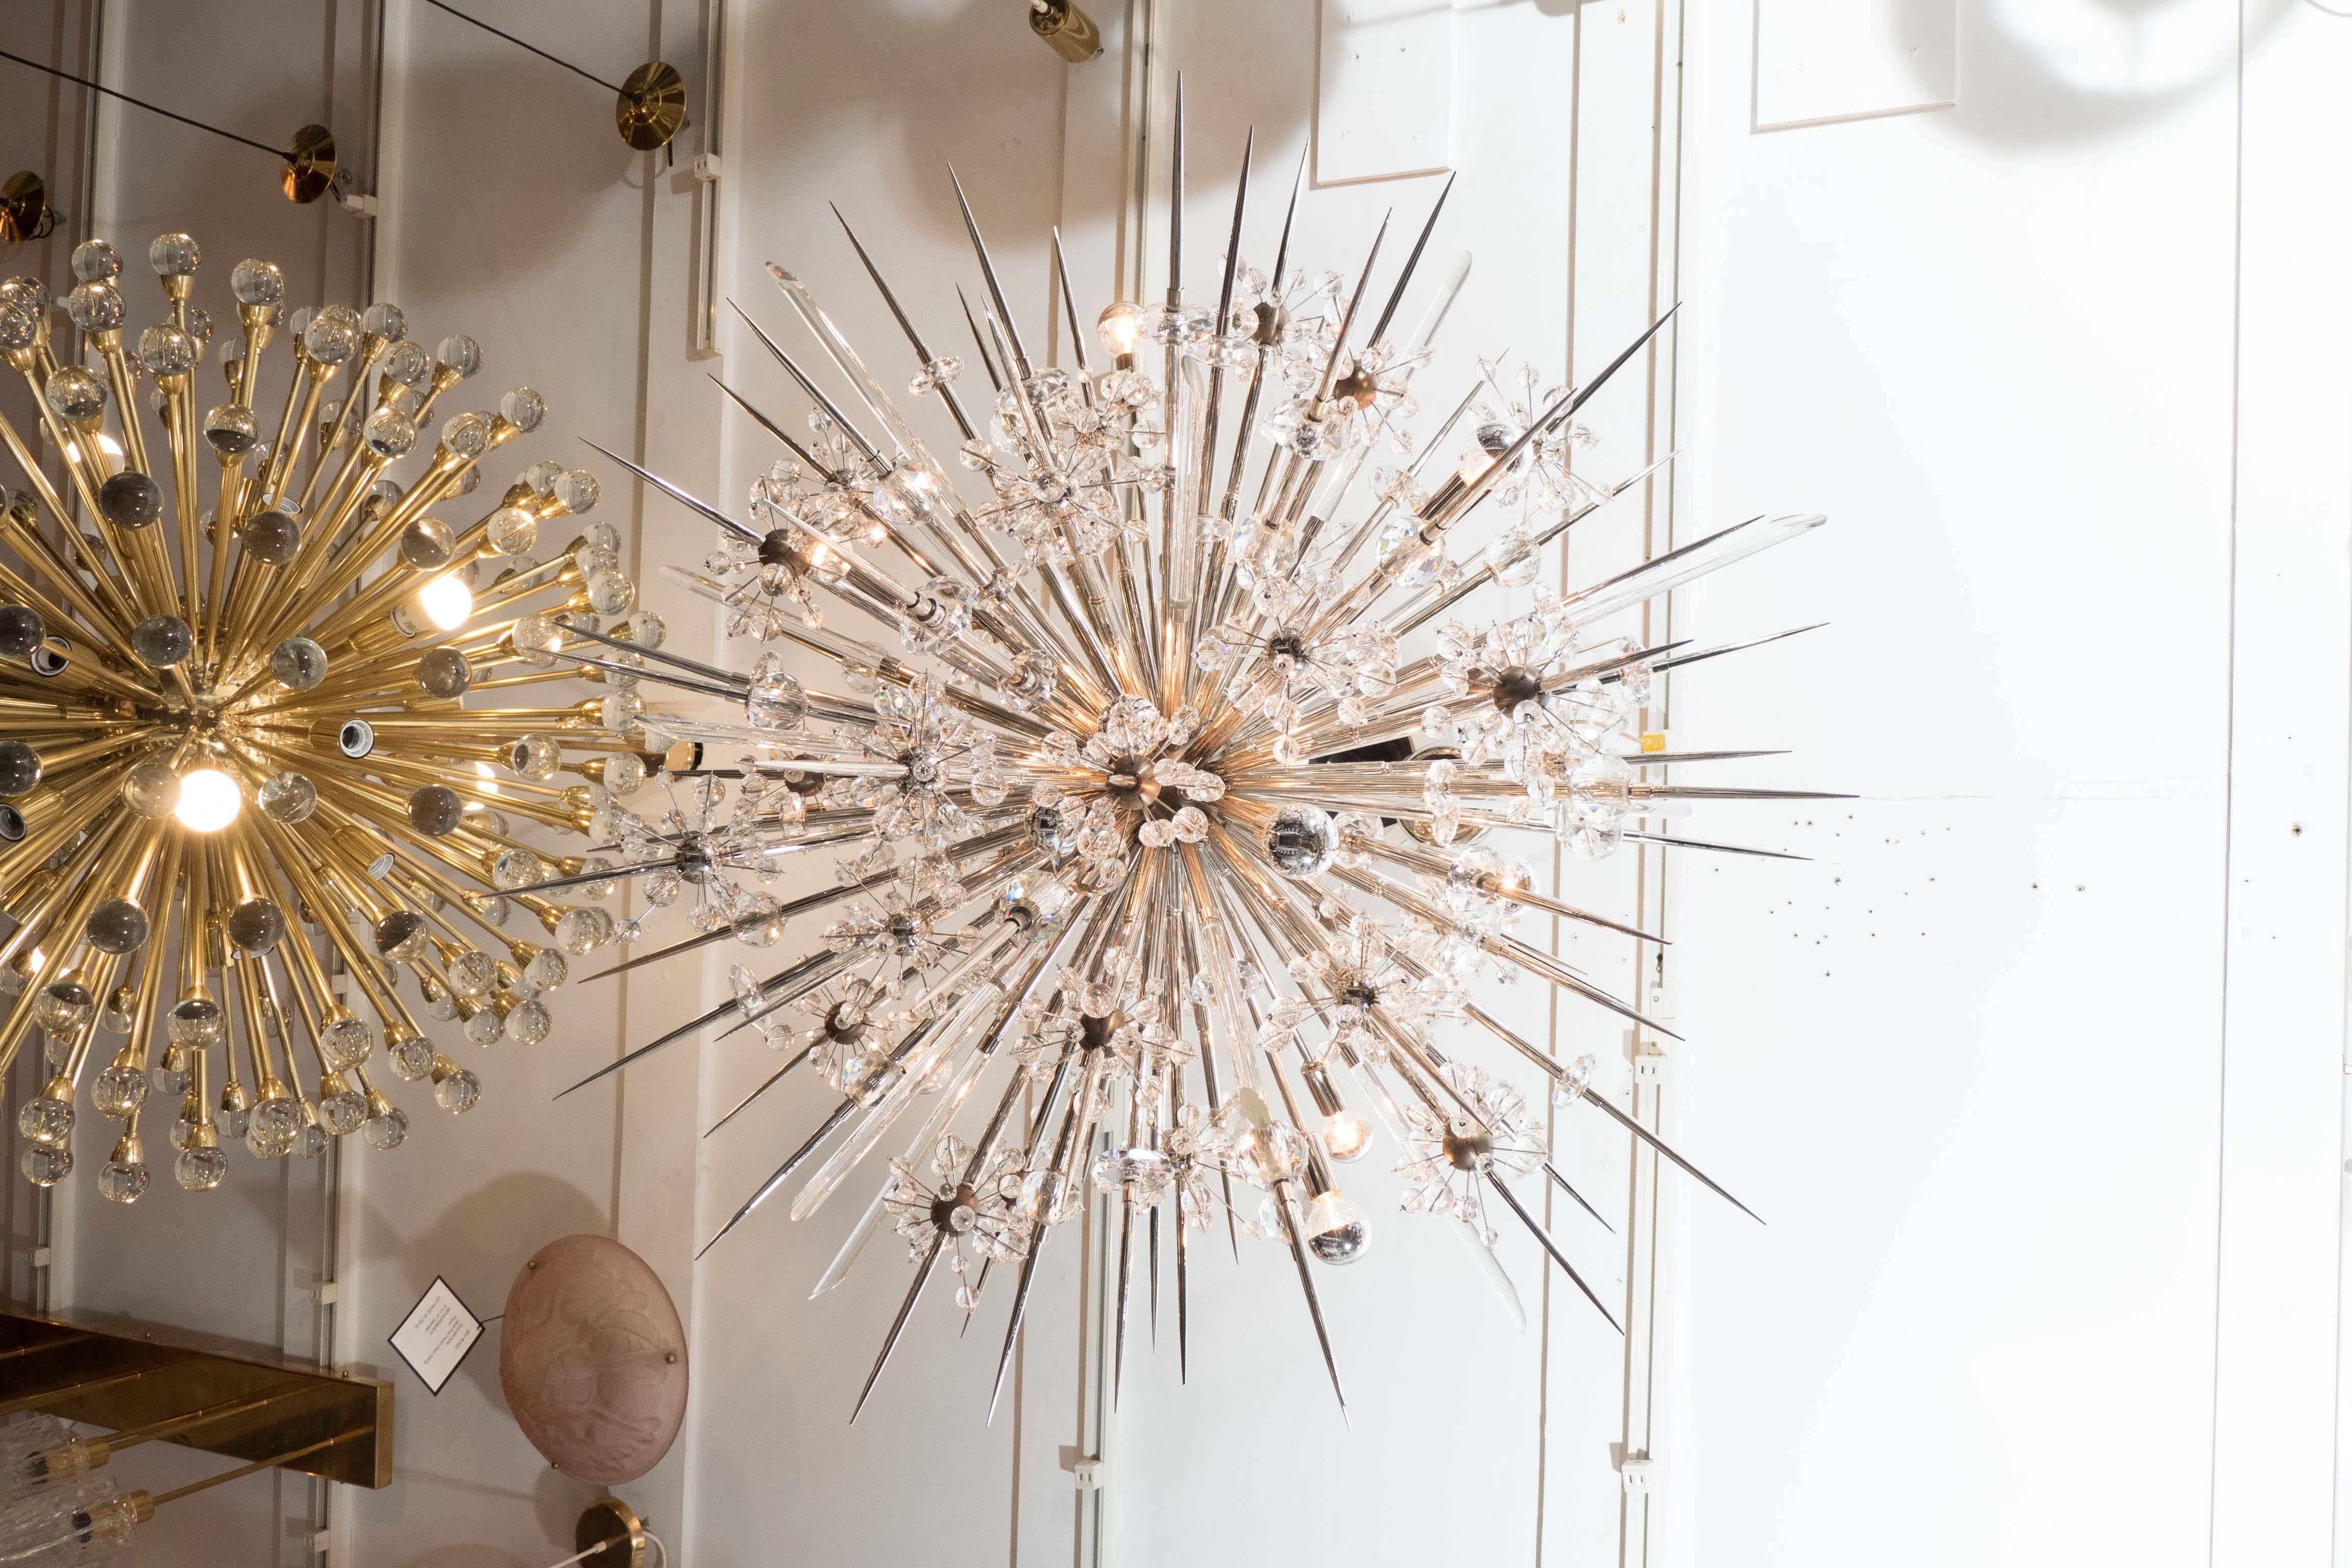 Custom Austrian crystal starburst sputnik chandelier in polished nickel with ebony center spheres. Customization is available in different sizes and finishes.